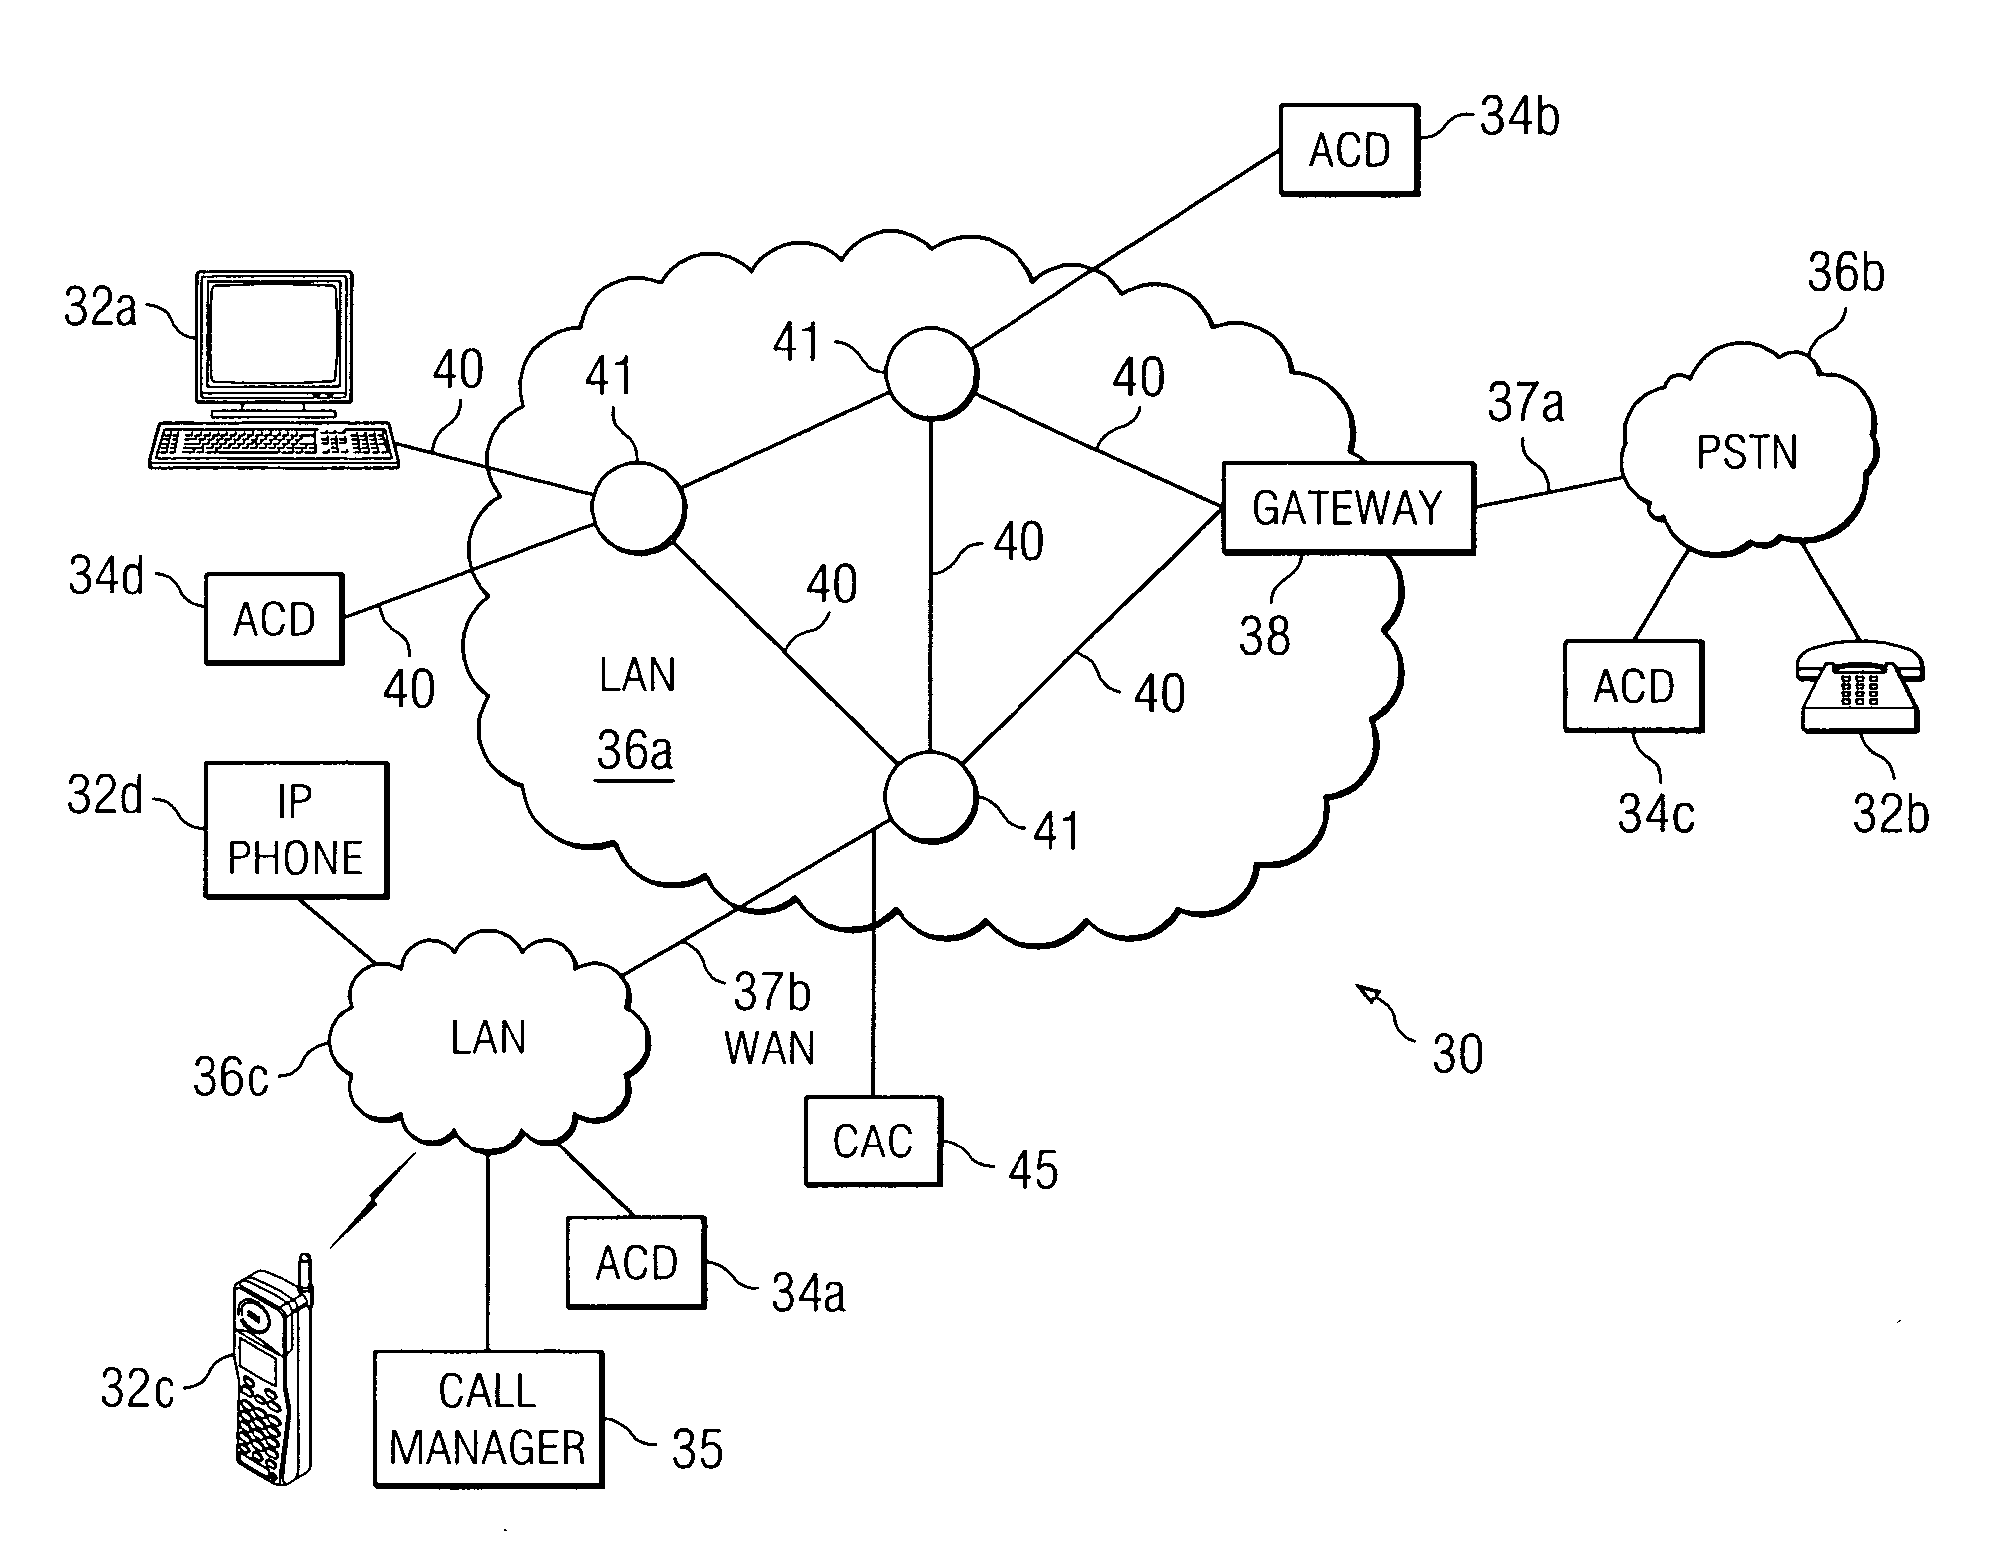 Method and system for handling calls at an automatic call distributor